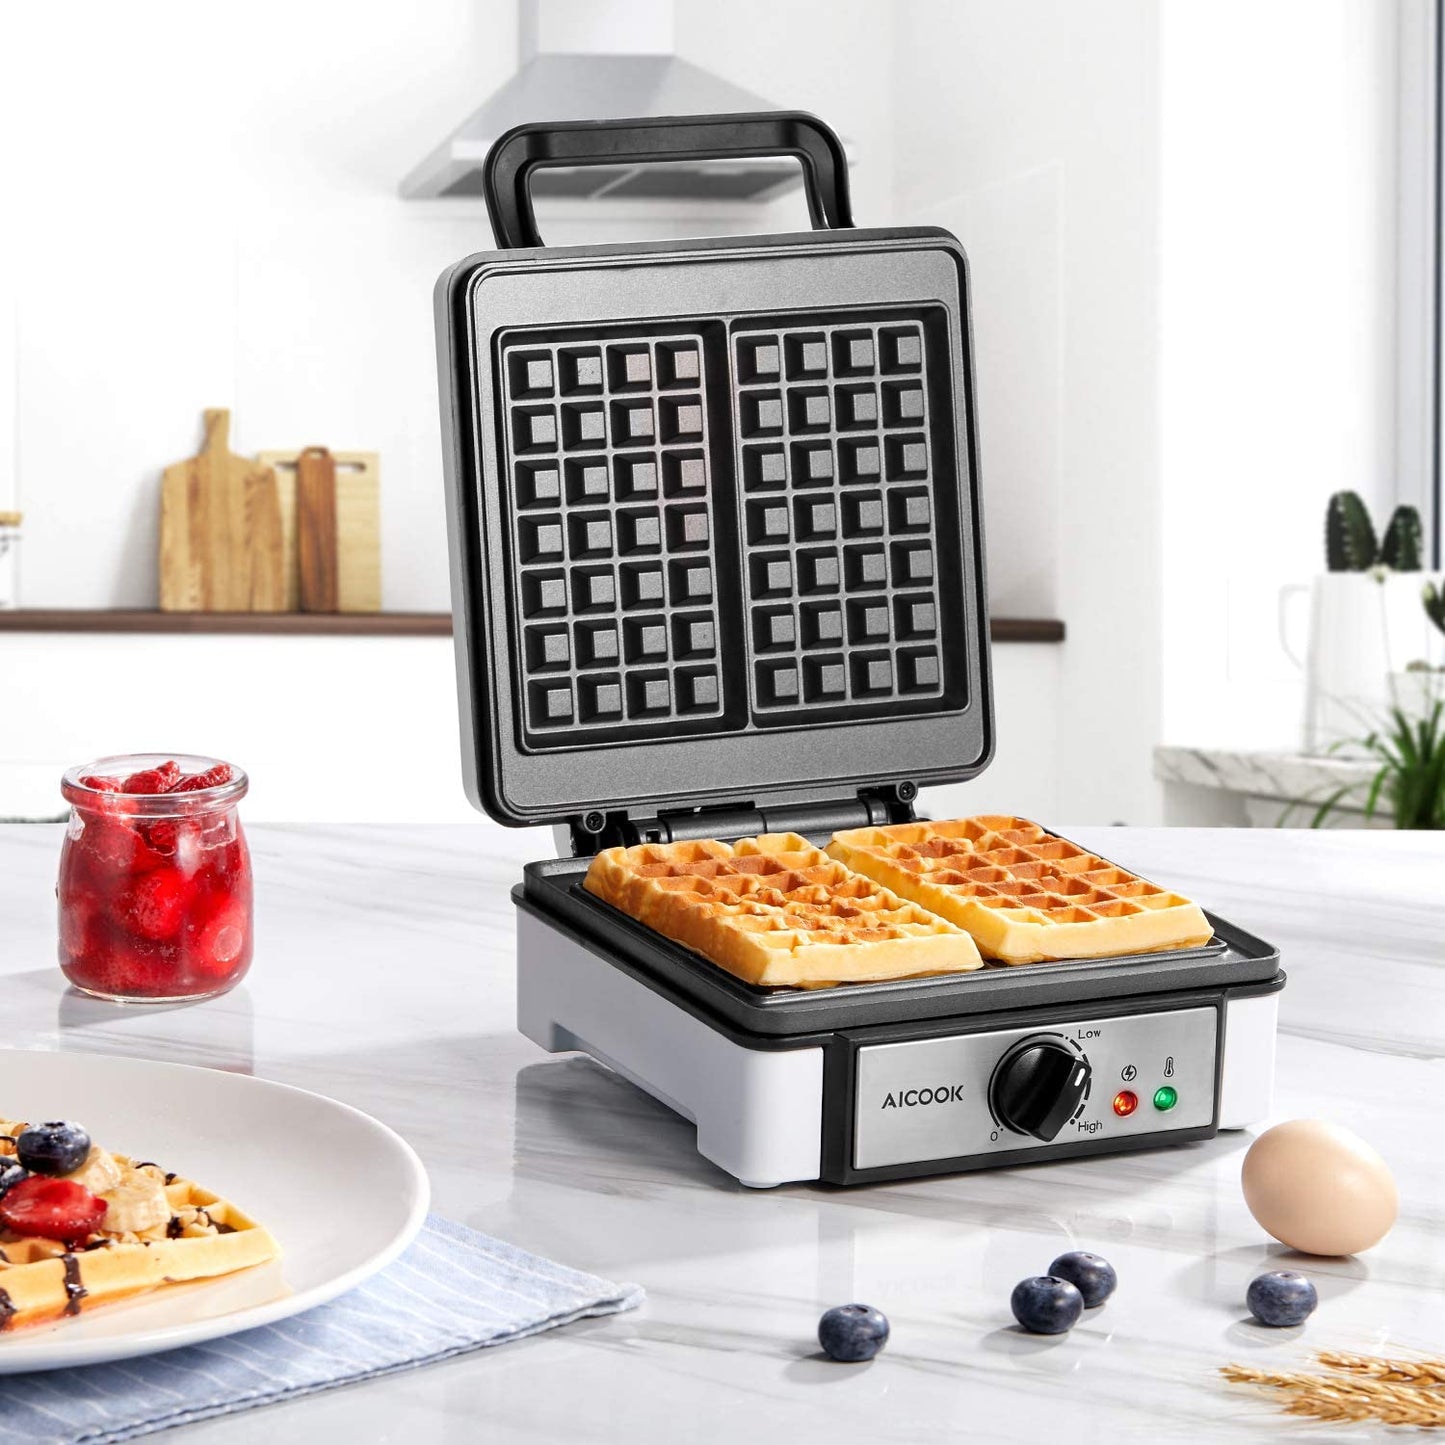 AICOOK | Waffle Maker Iron, 1200W Belgian Waffle Machine, Non-Stick Design, Browning Control, Easy to Store Compact Design, Beautiful Gift for Wedding, Party, House-moving, Birthday, Medium, White